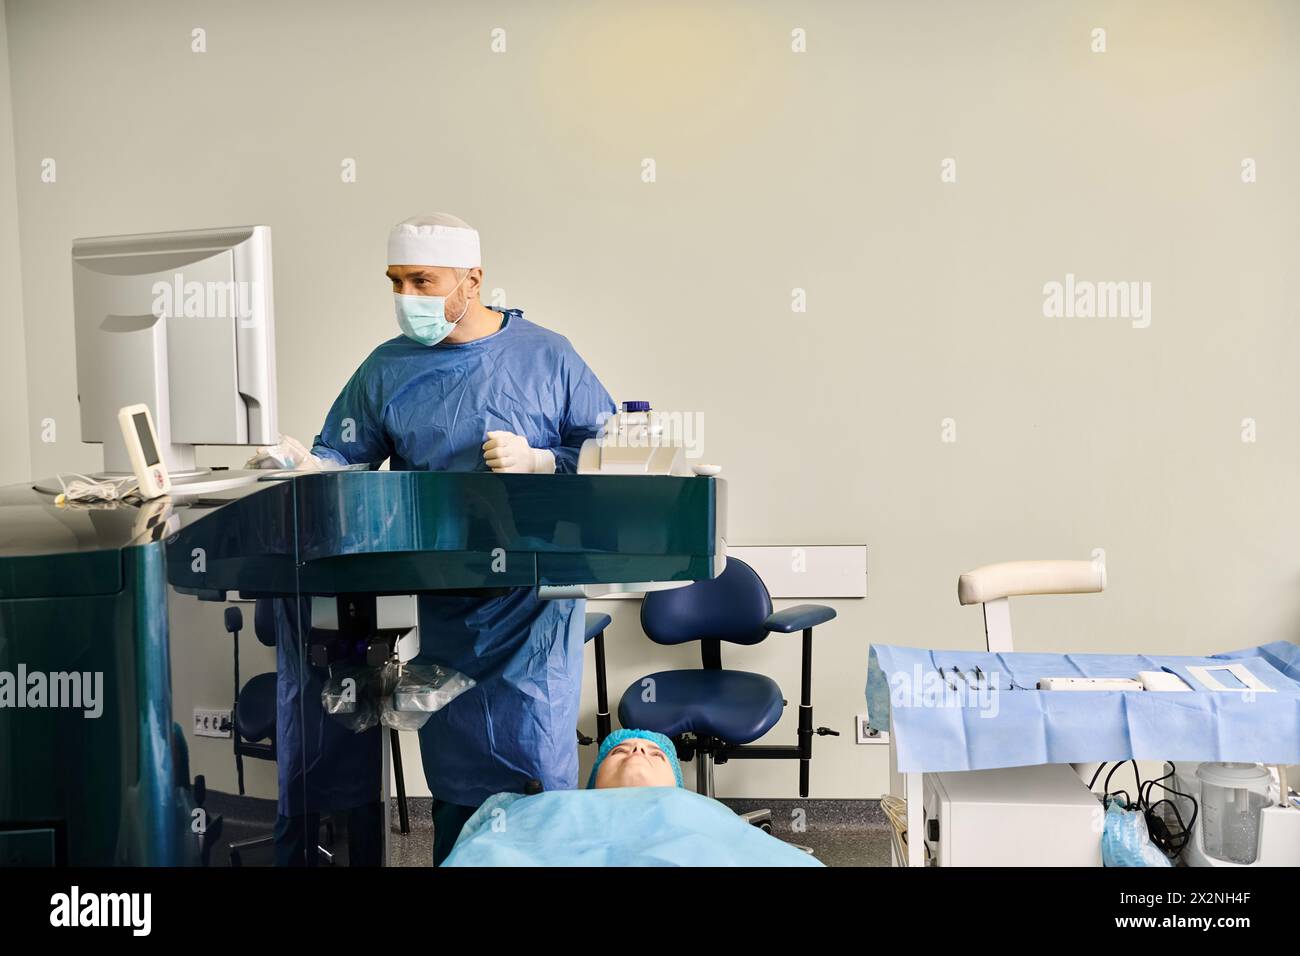 Surgeon in scrubs operating precision machine in medical setting. Stock Photo